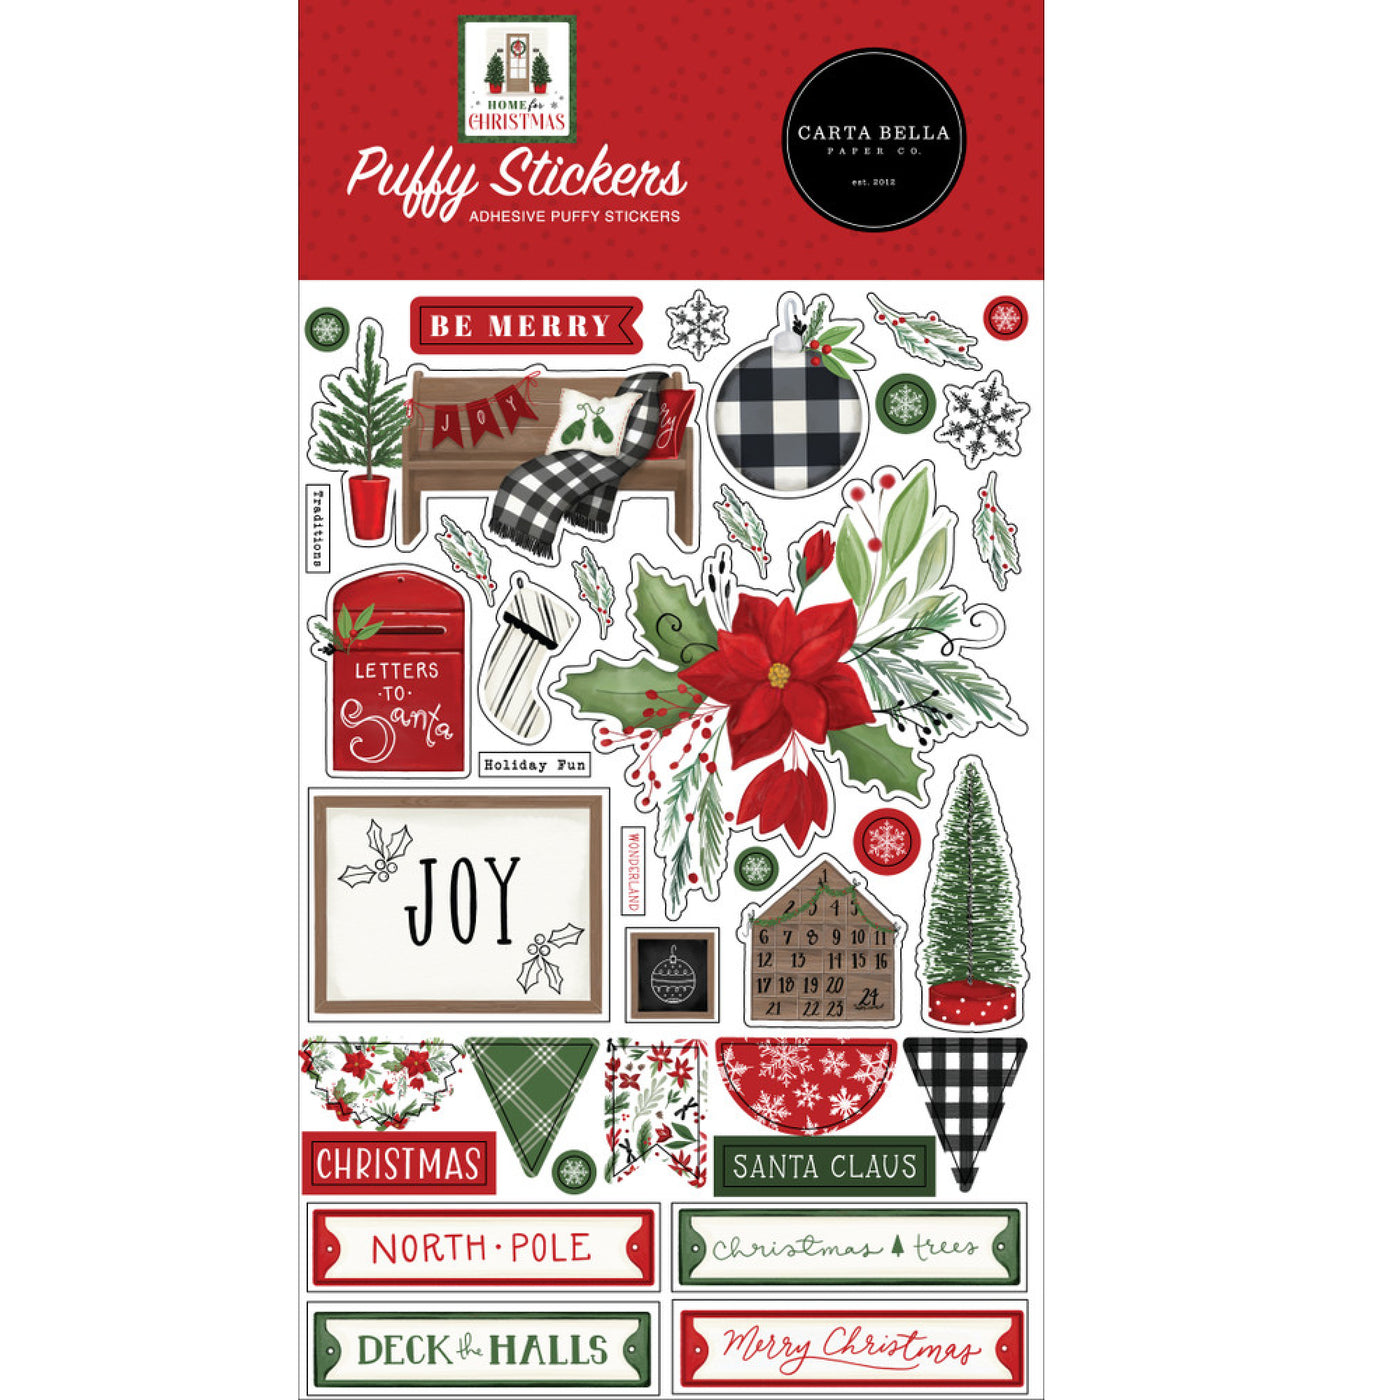 37 Puffy Stickers in various shapes and sizes; adhesive back, designed to coordinate with Home for Christmas Collection by Carta Bella.